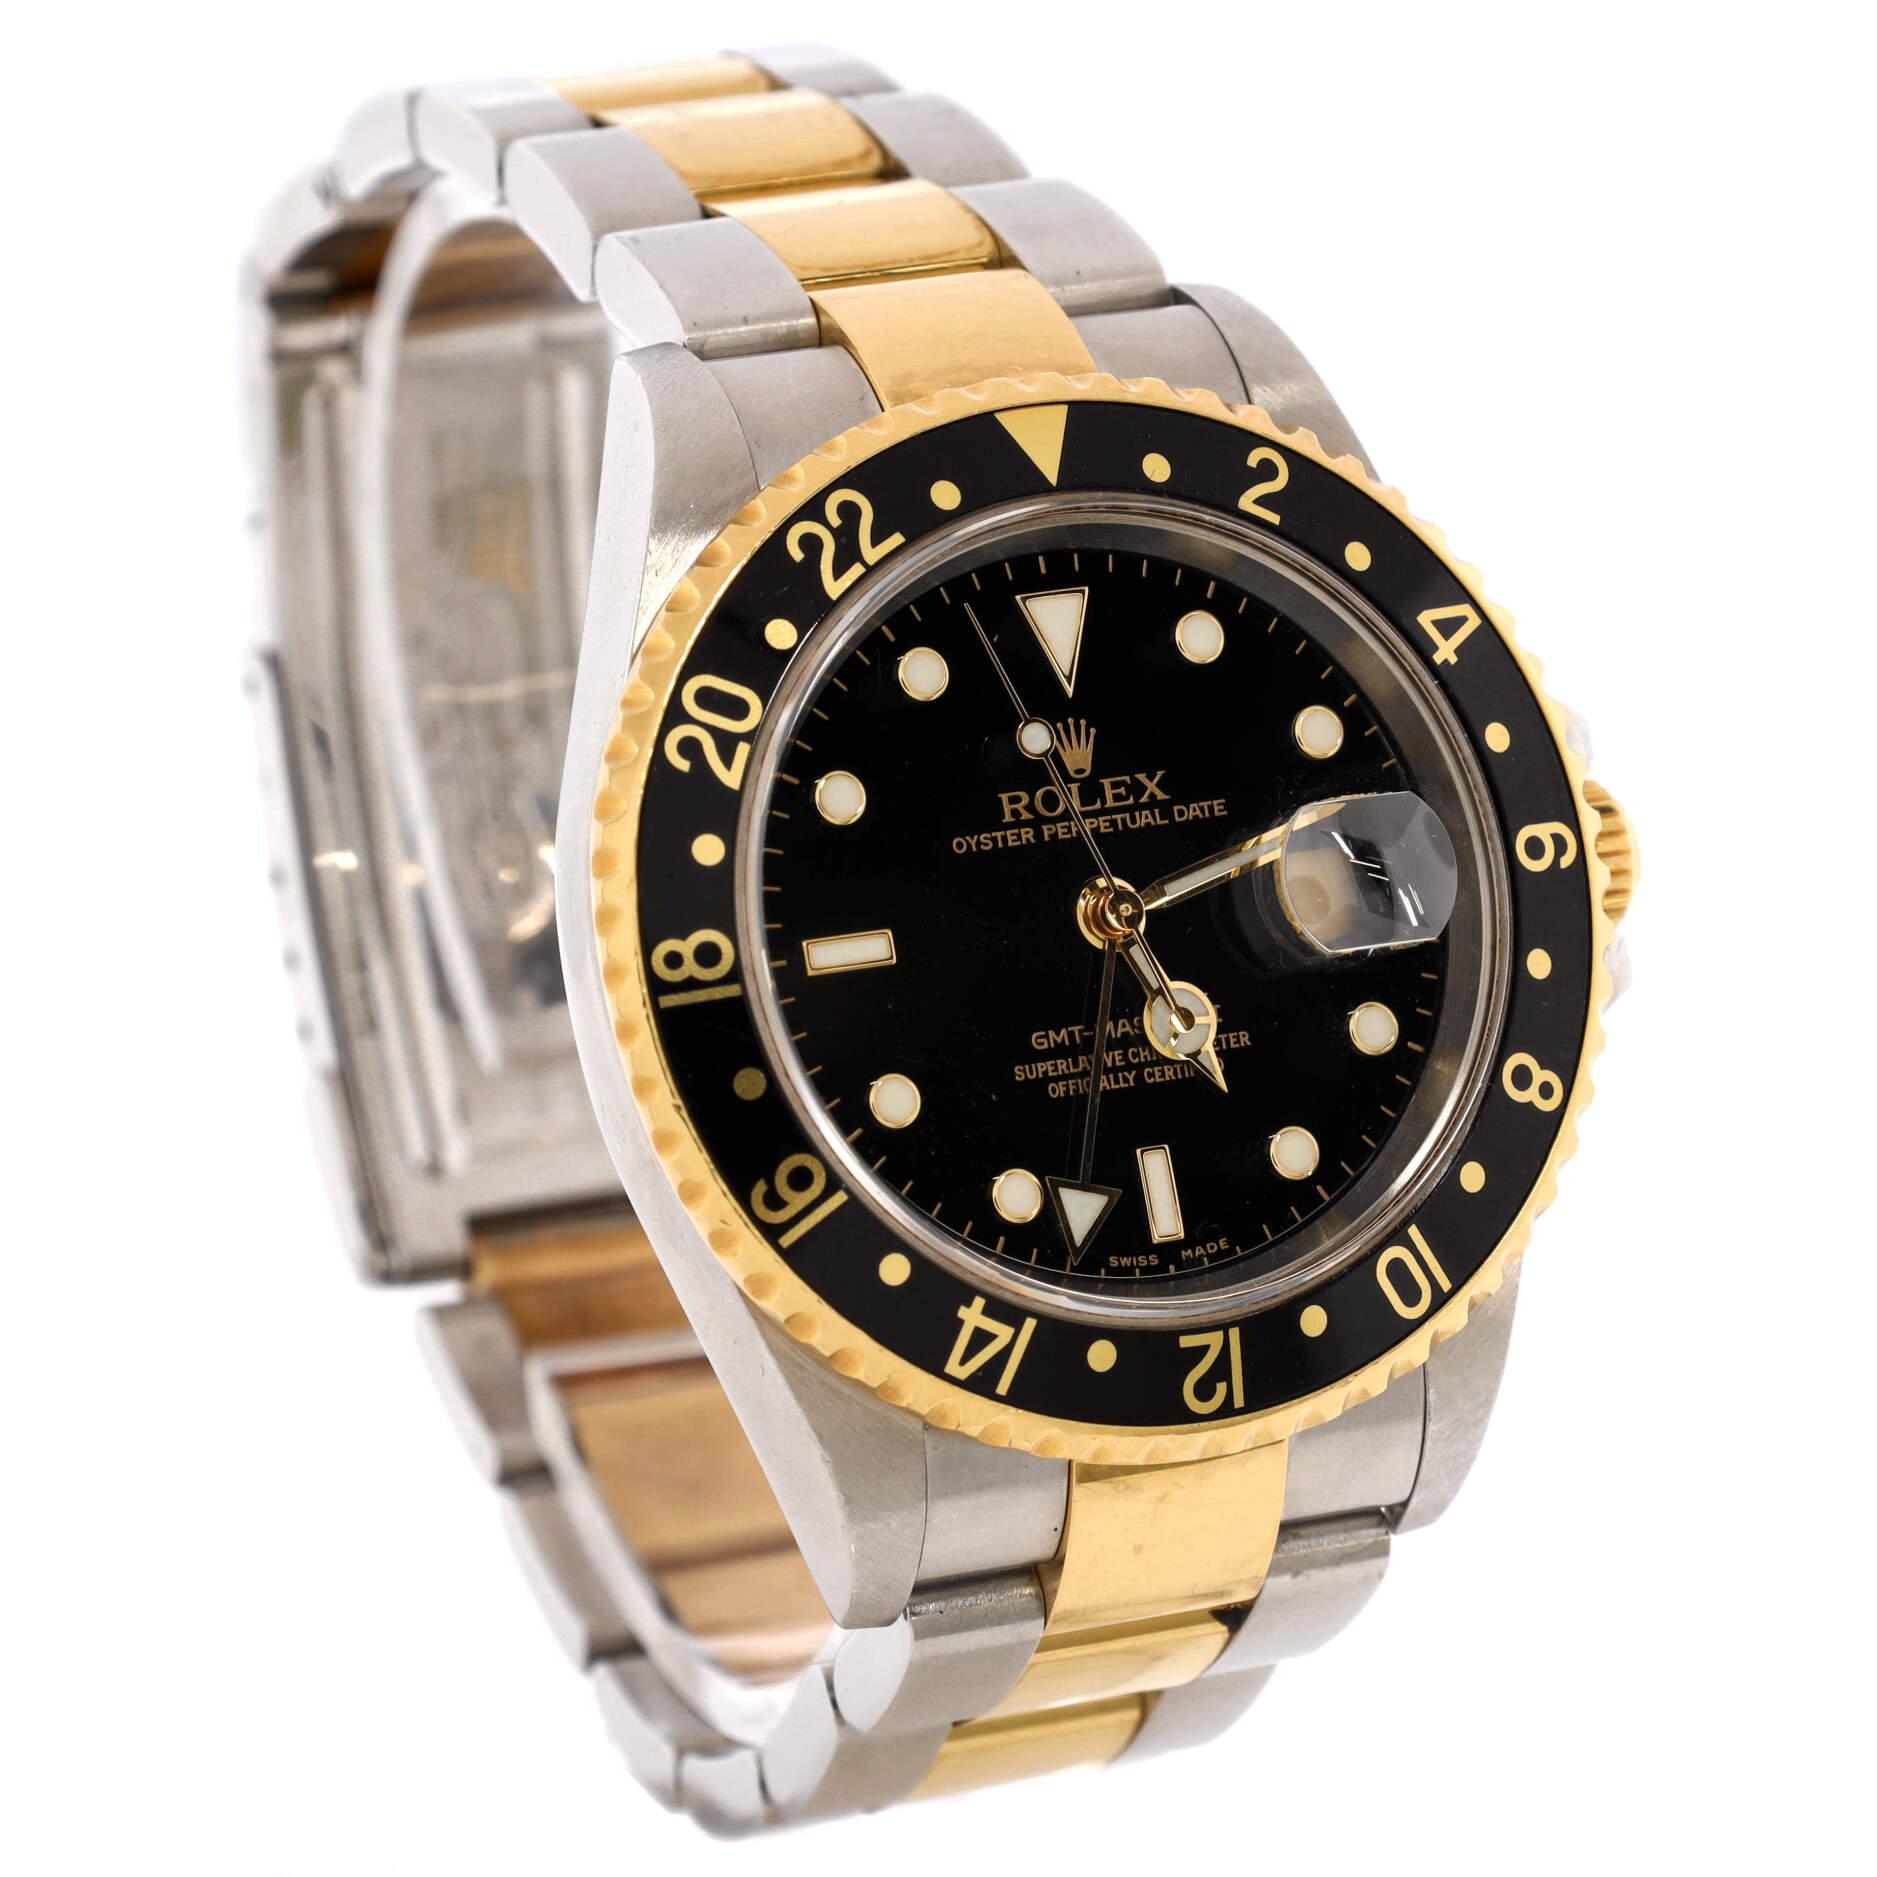 Rolex Oyster Perpetual Date GMT-Master II Automatic Watch Stainless Steel In Good Condition For Sale In New York, NY